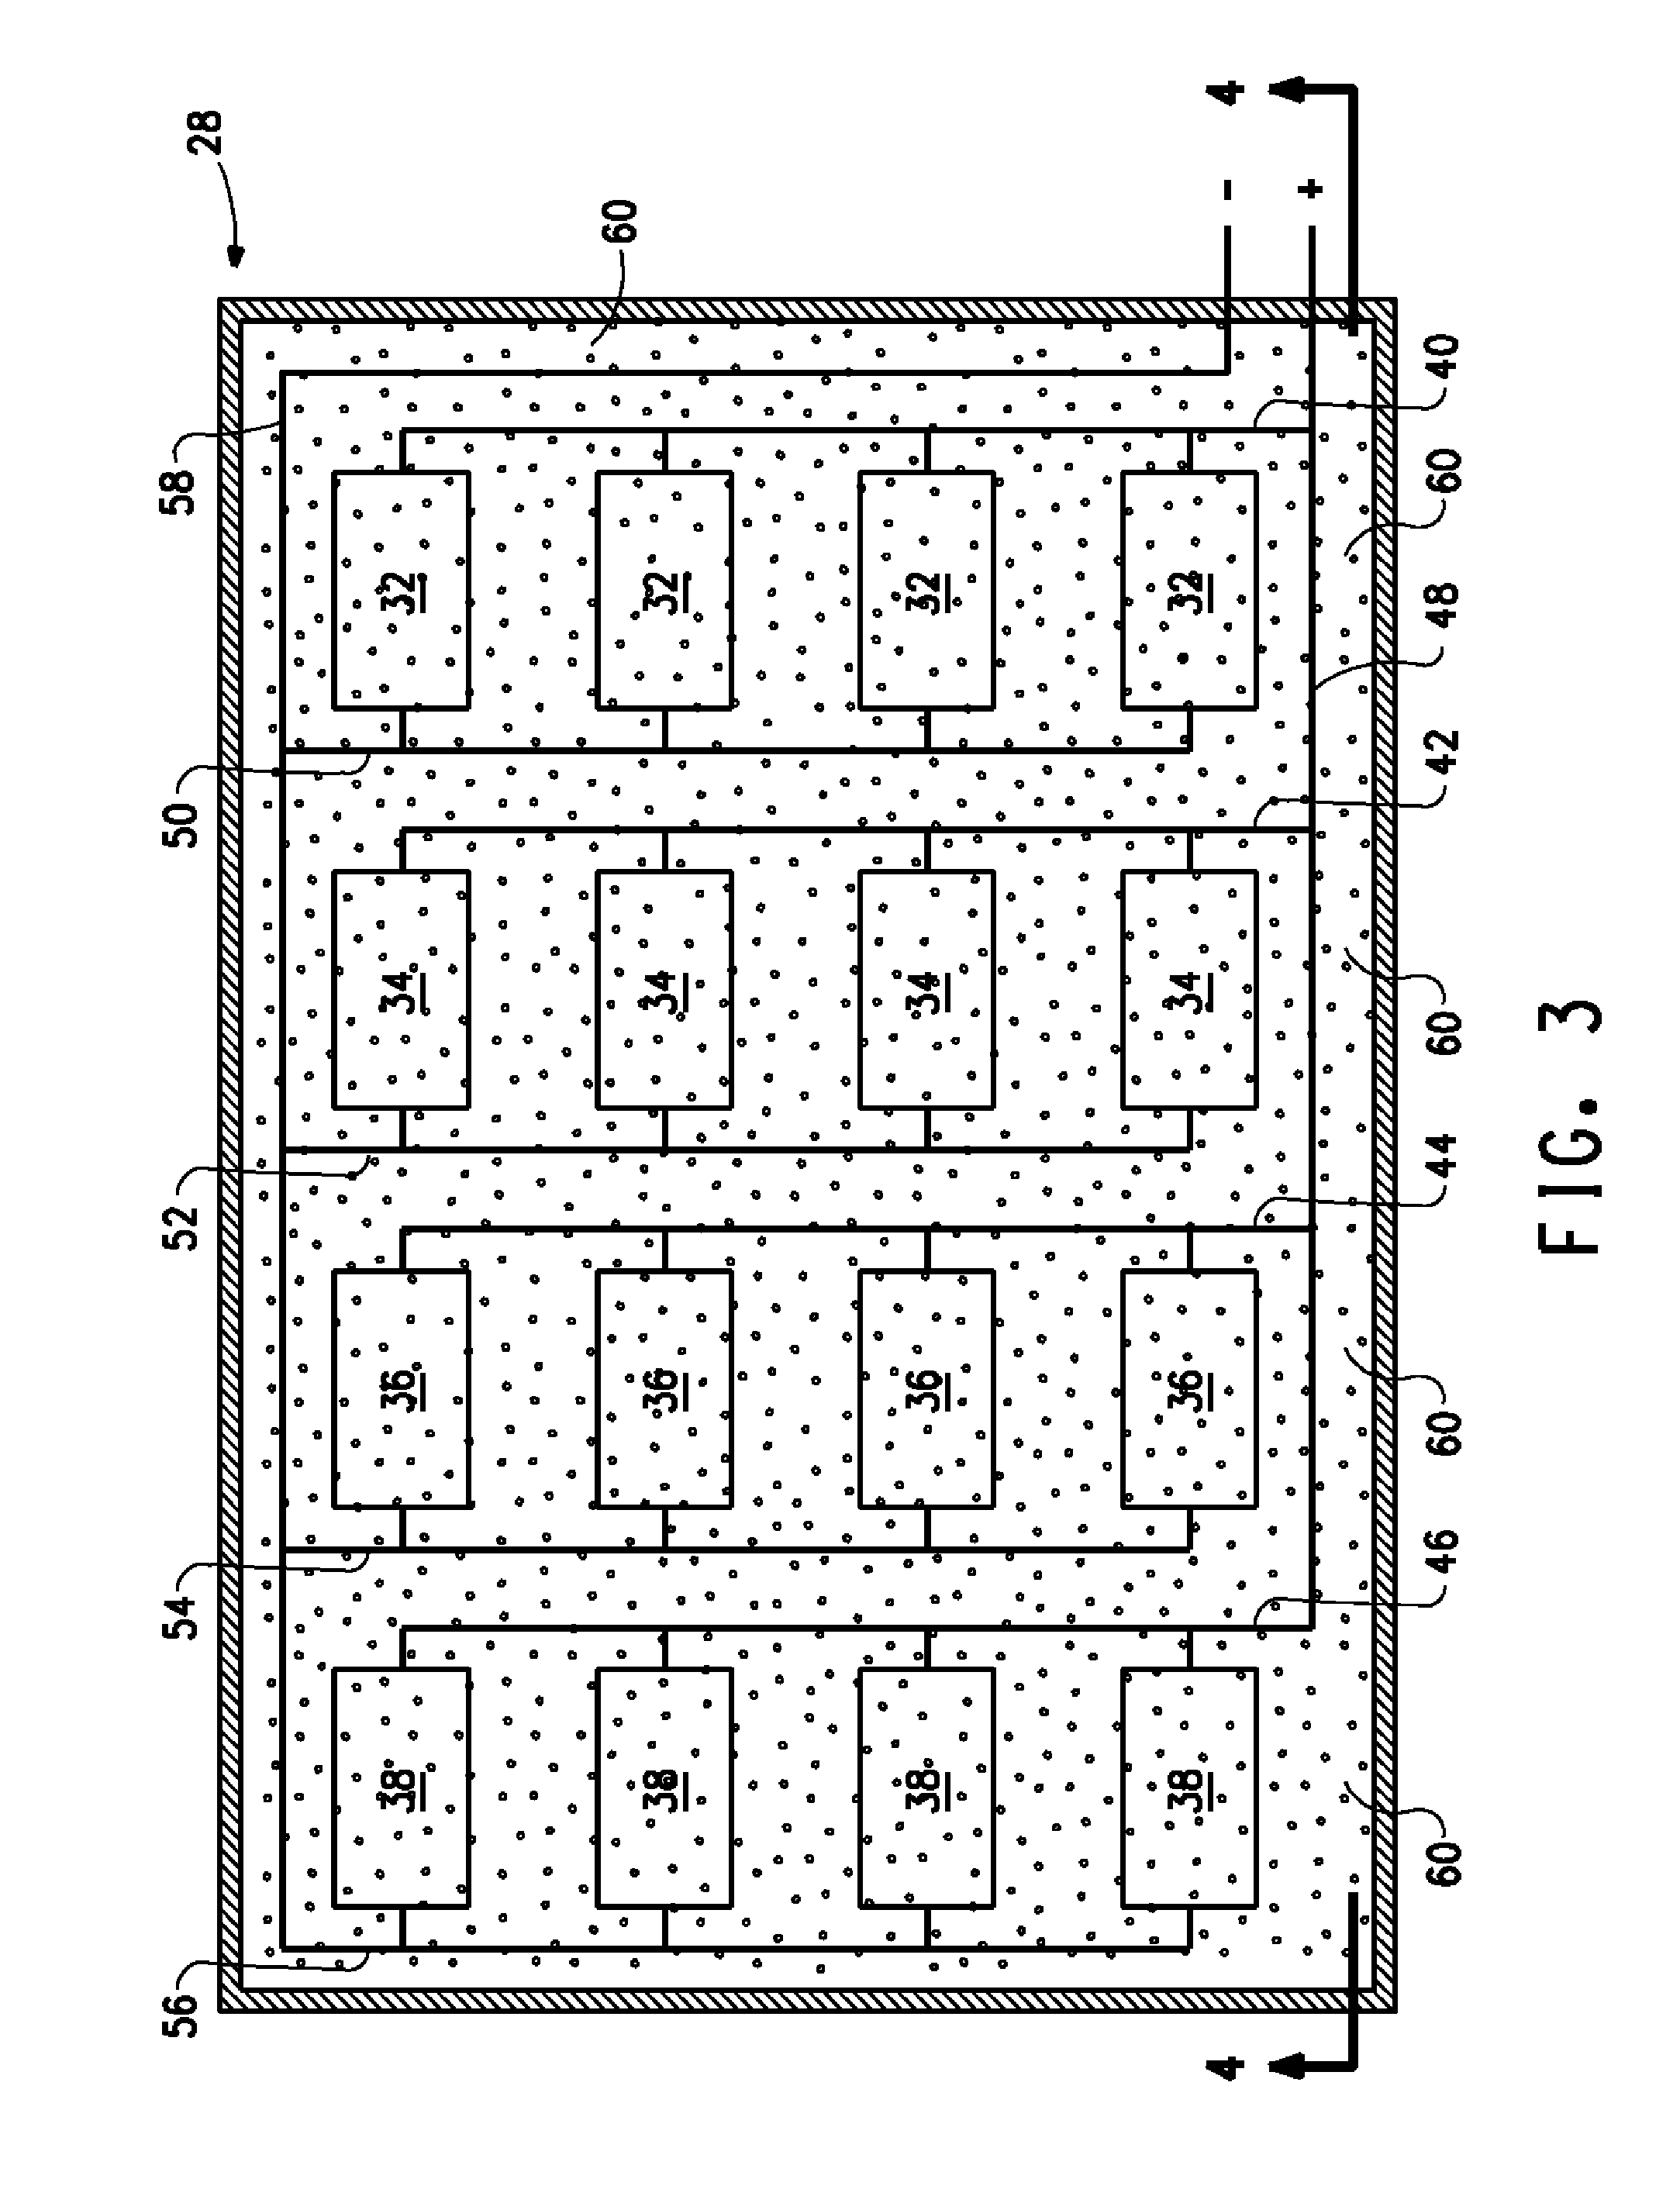 Mixture for Abating Combustion by a Li-ion Battery